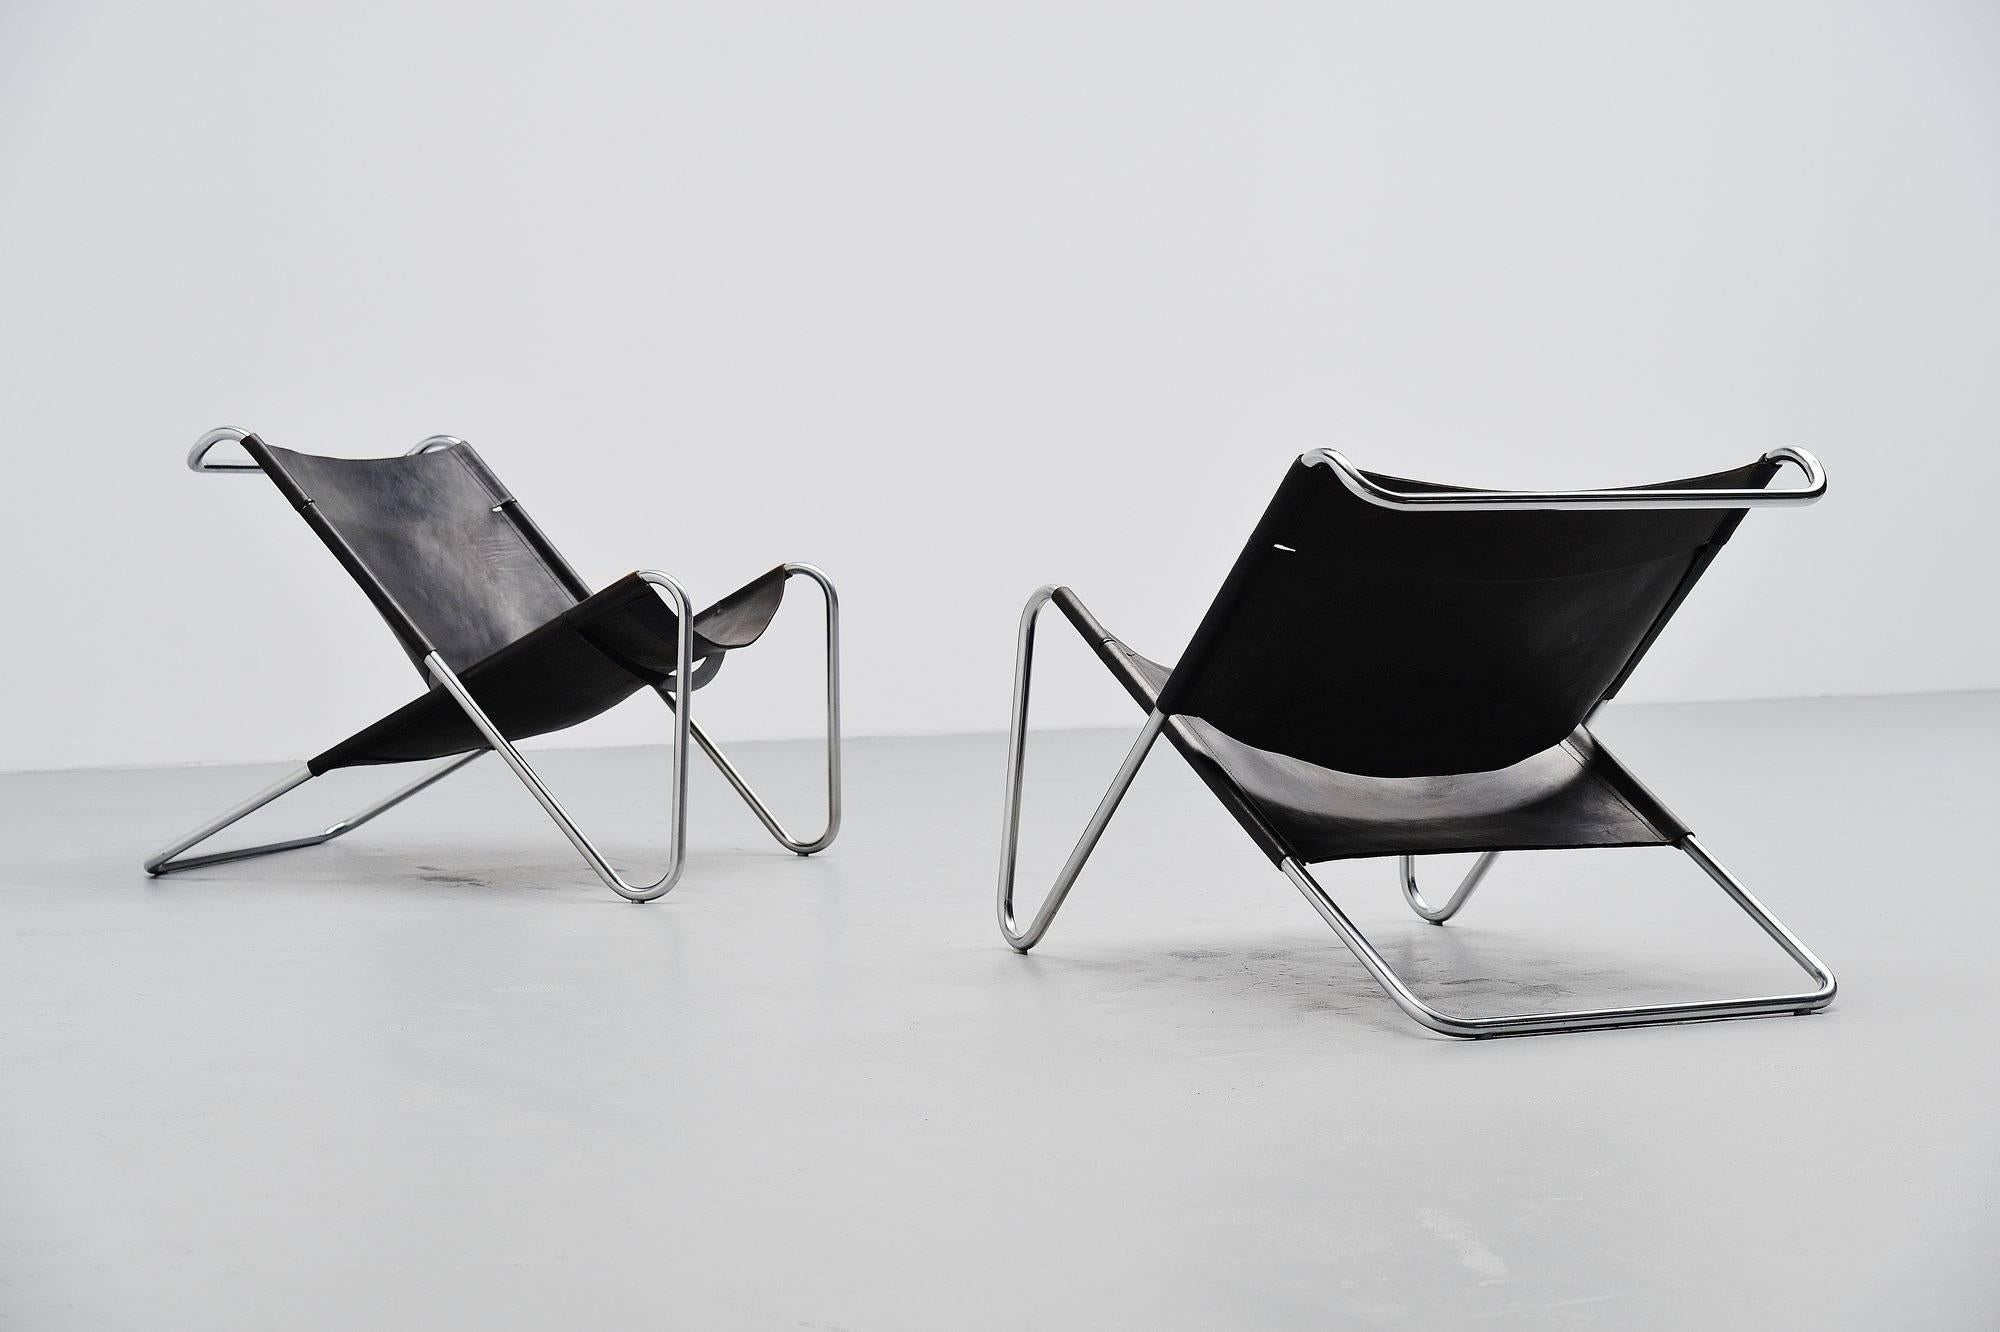 Ultra rare pair of lounge chairs designed by Chan Kwok Hoi, manufactured by ‘t Spectrum Holland and was in the collection from 1973-1974. The exact production numbers are unknown but not more than 100 chairs were produced. These chairs have brushed